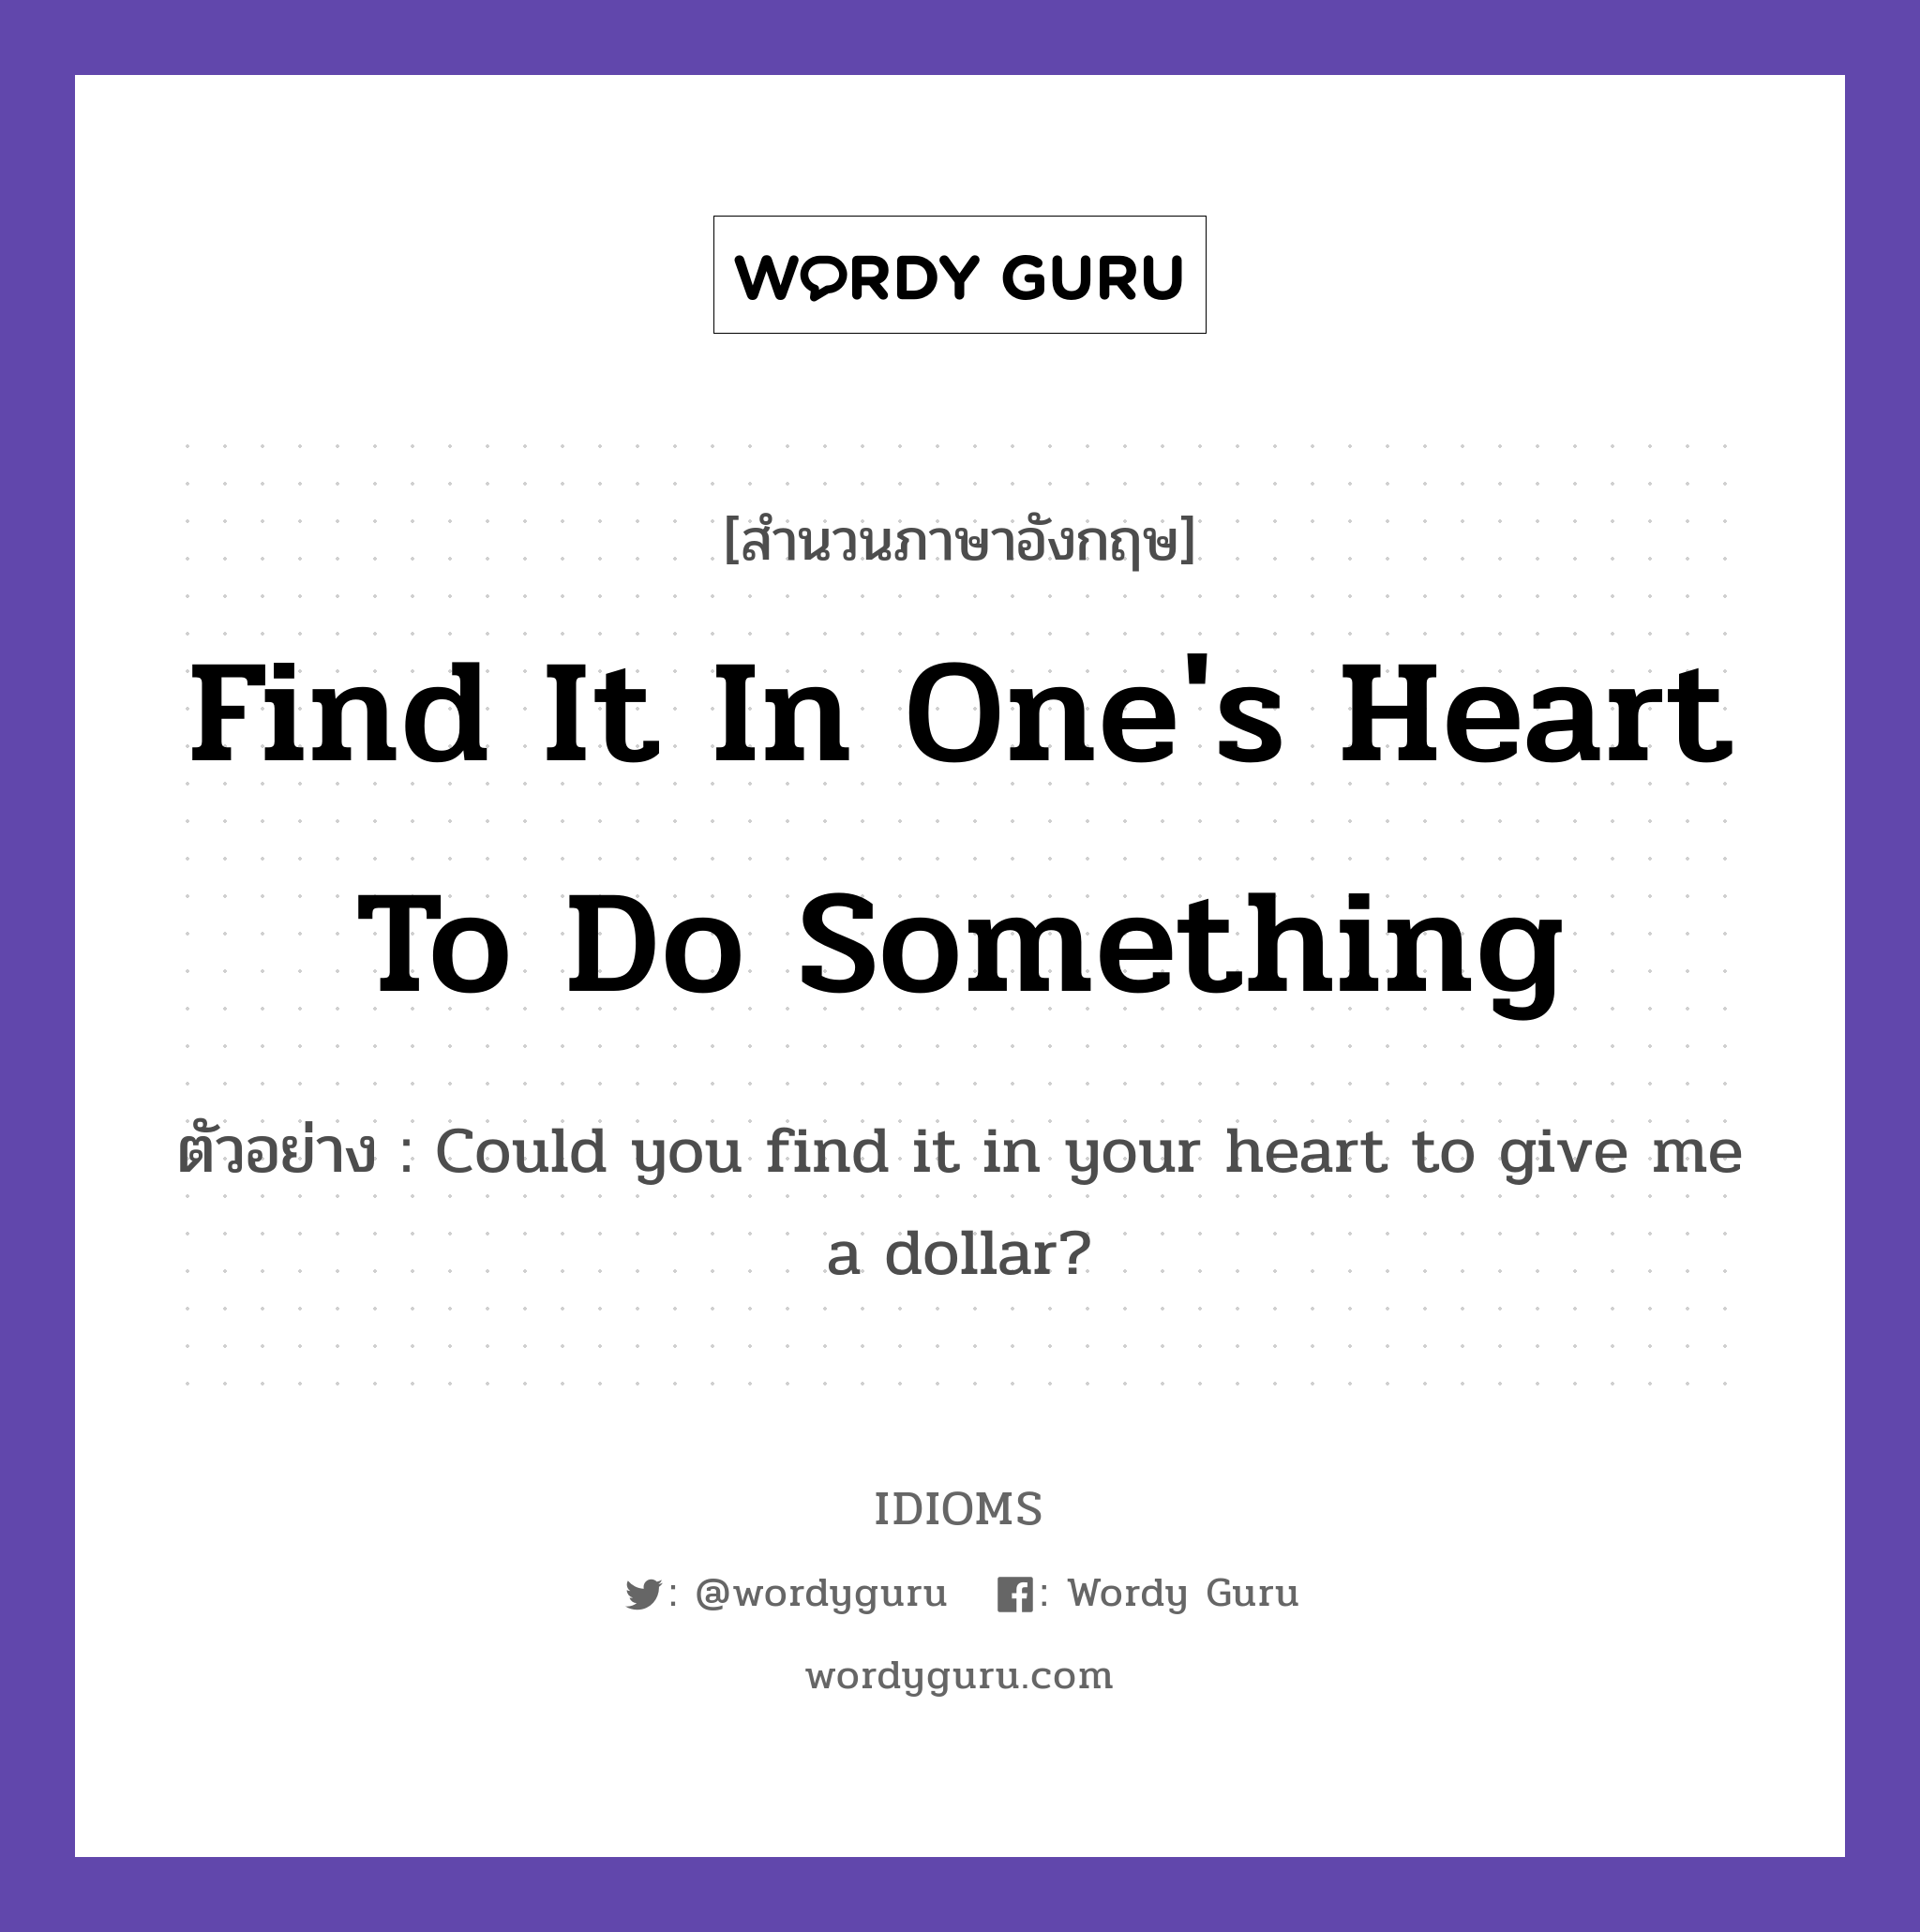 Find It In One's Heart To Do Something แปลว่า?, สำนวนภาษาอังกฤษ Find It In One's Heart To Do Something ตัวอย่าง Could you find it in your heart to give me a dollar?